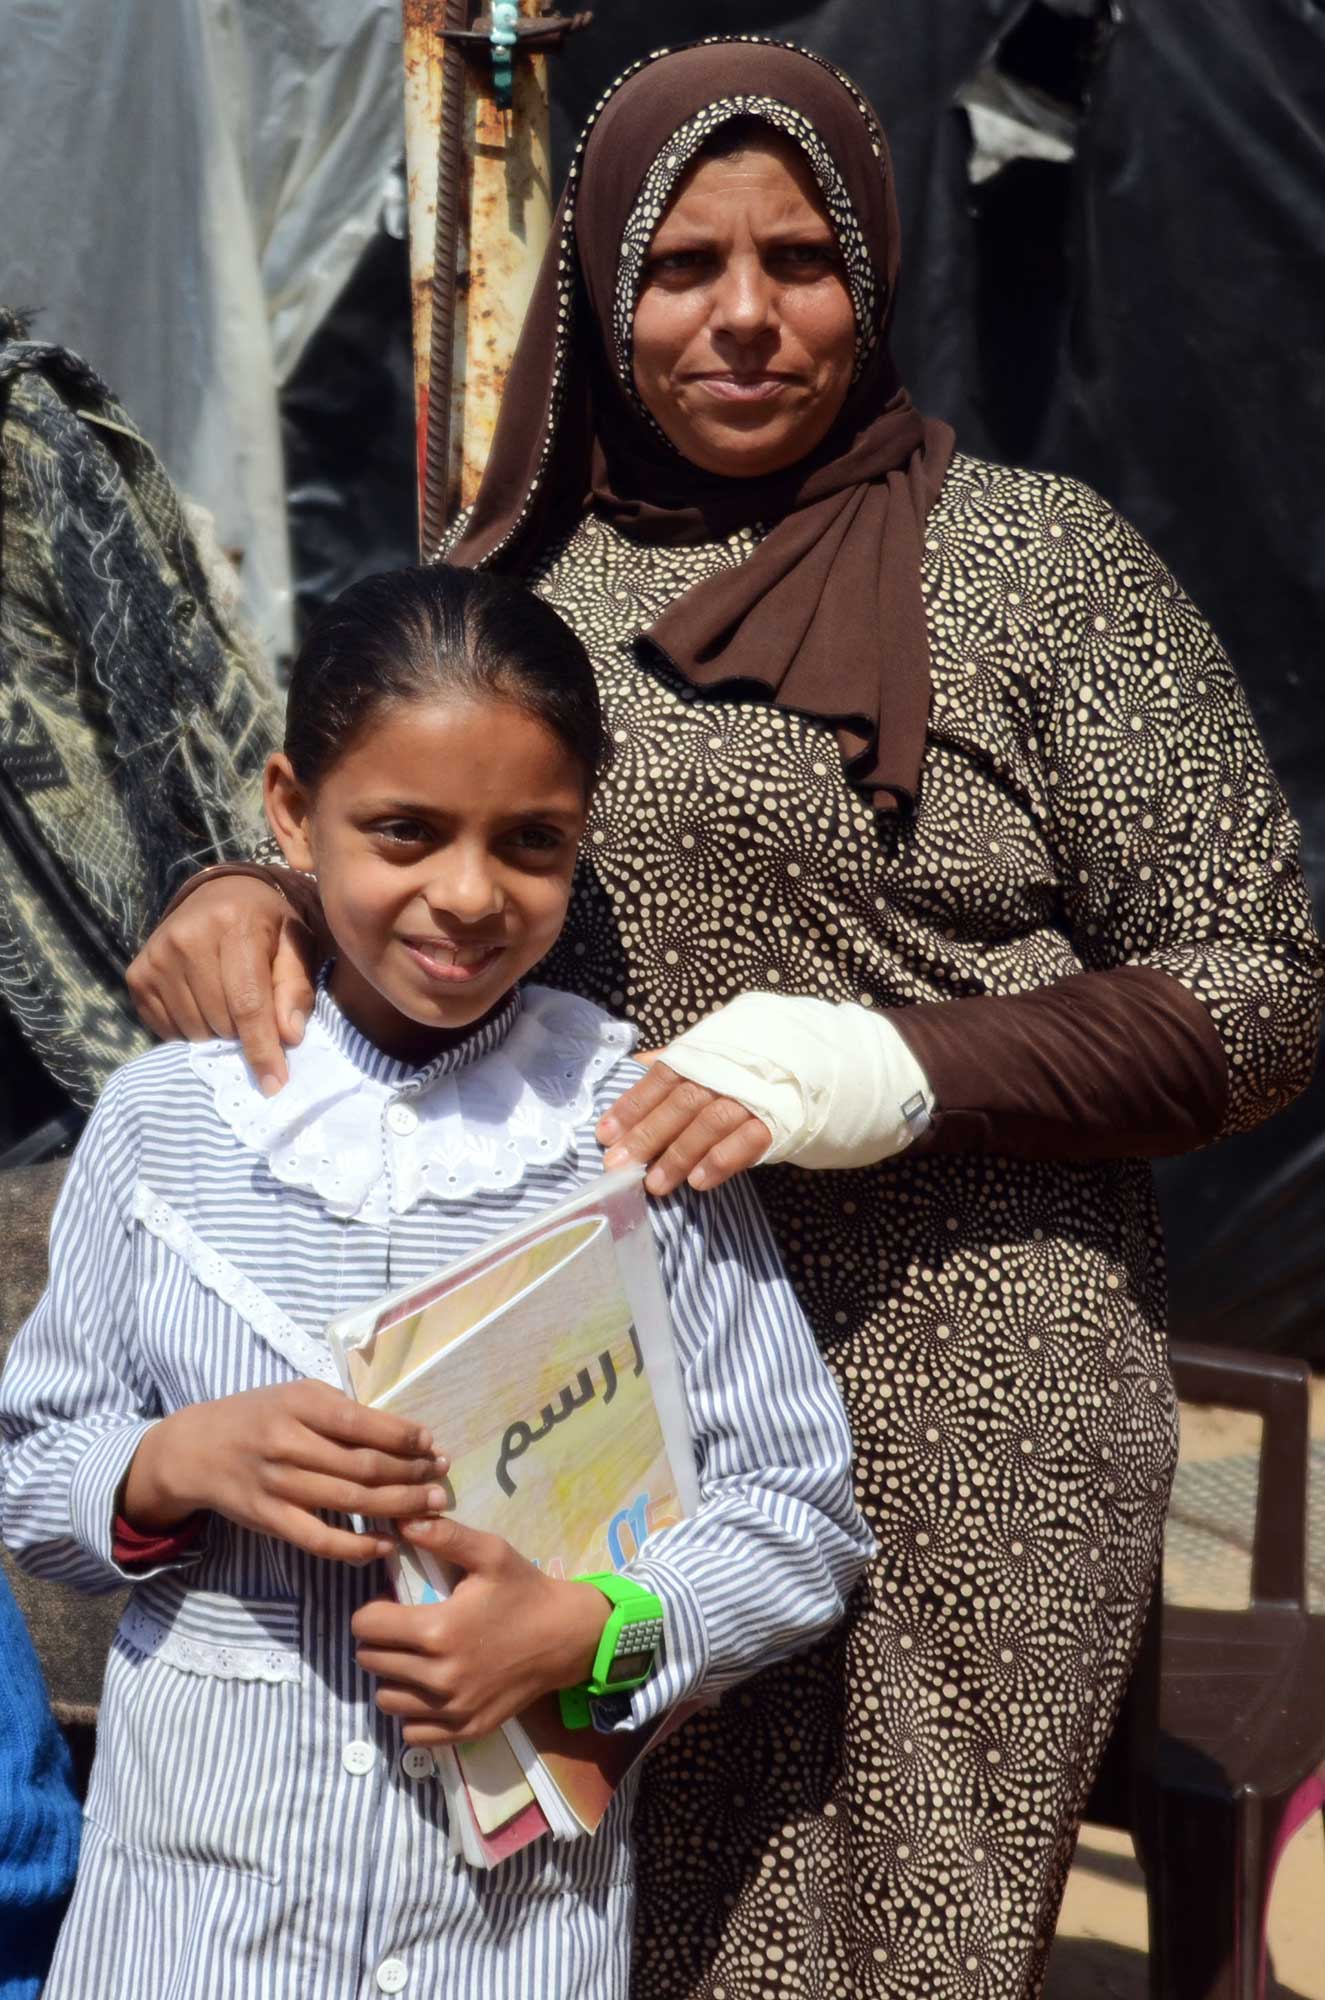 Laila and her daughter Maram stand in front of their home.